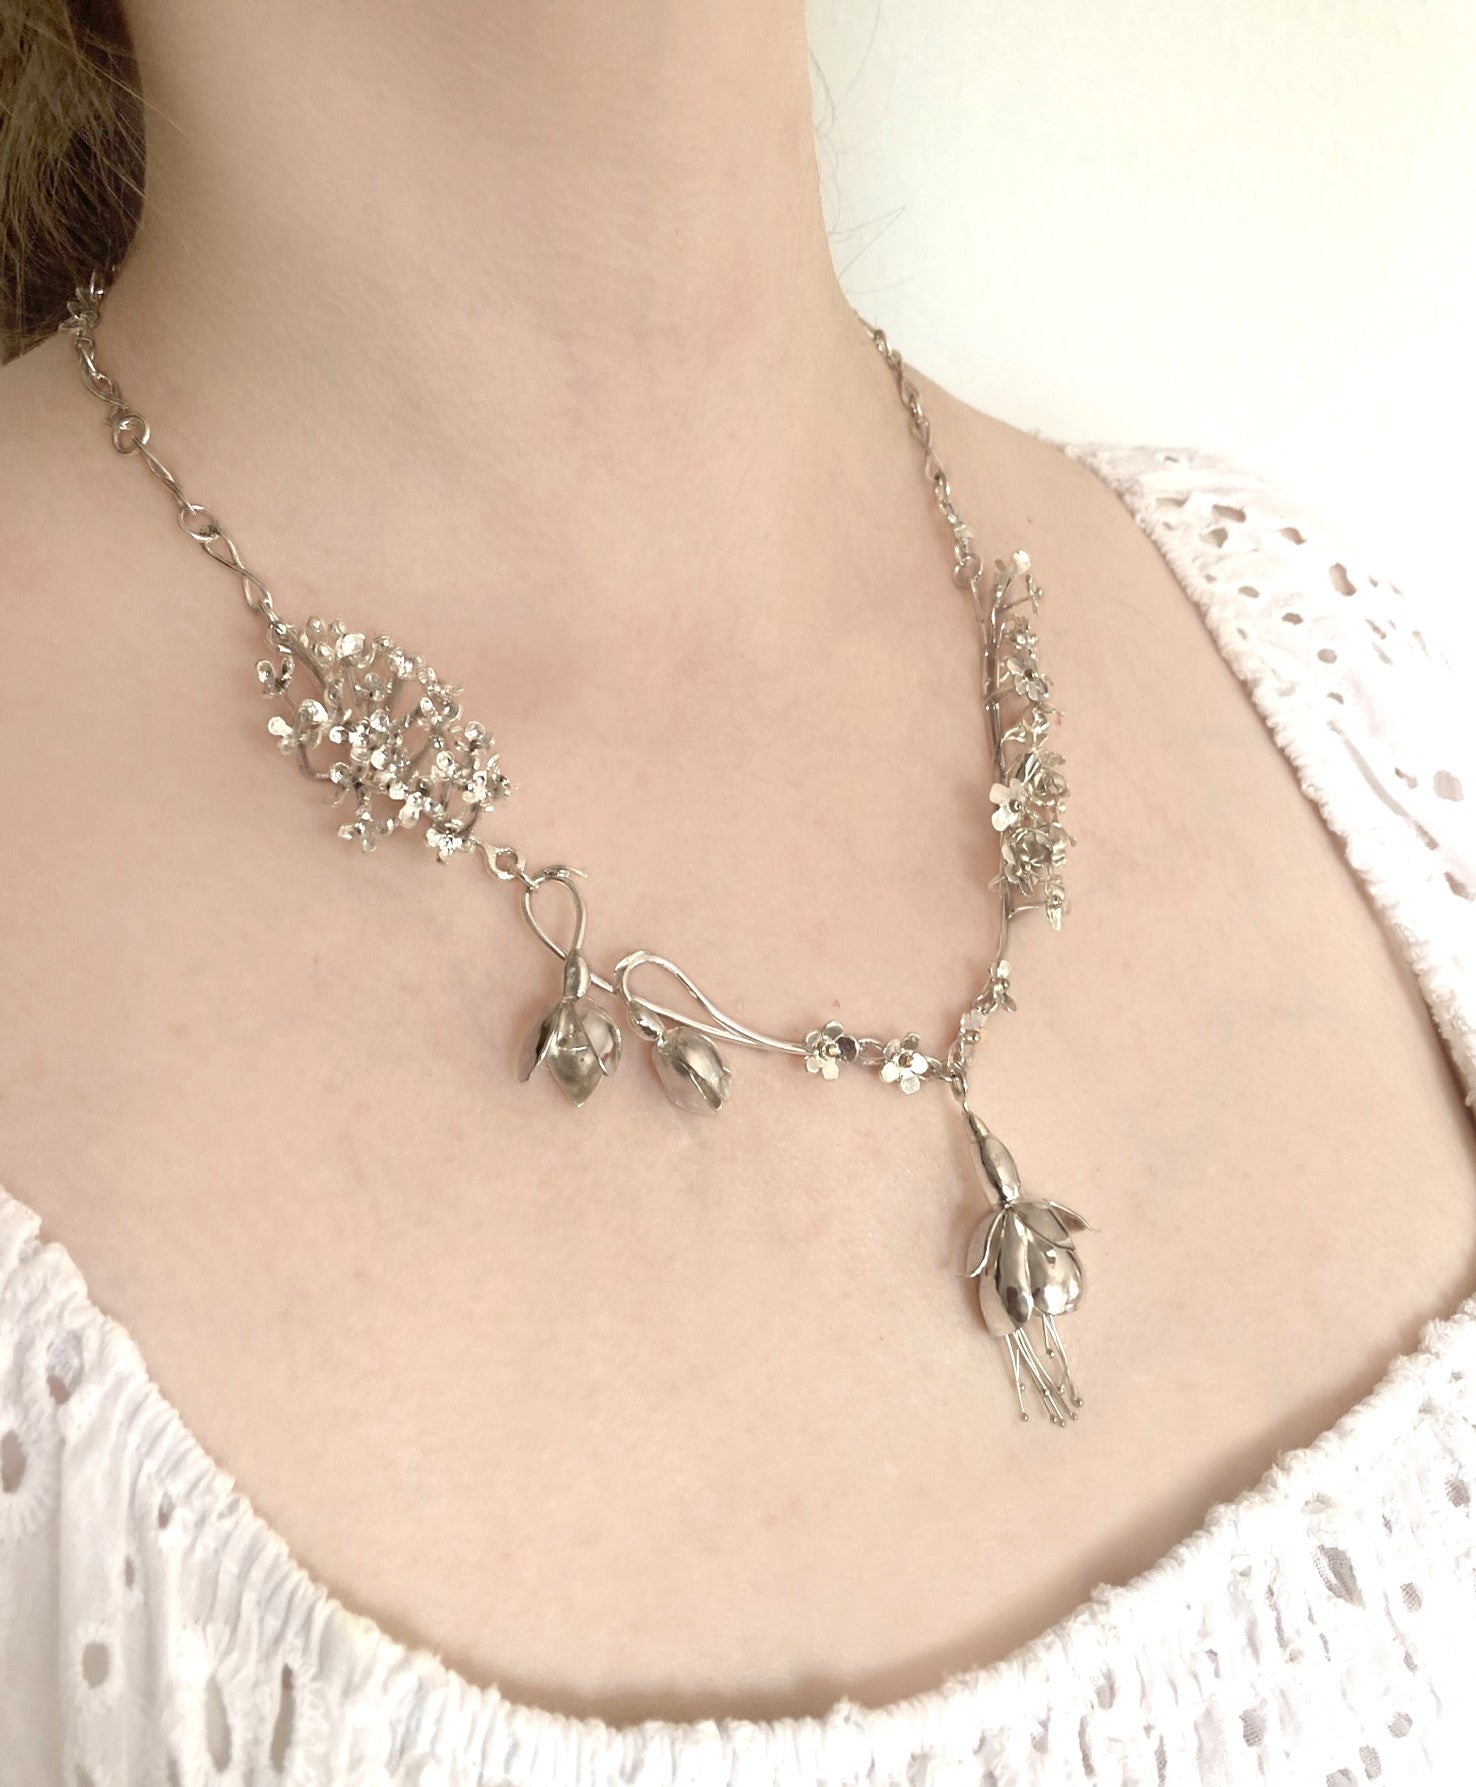 Sterling silver handmade botanical floral necklace on woman's neck